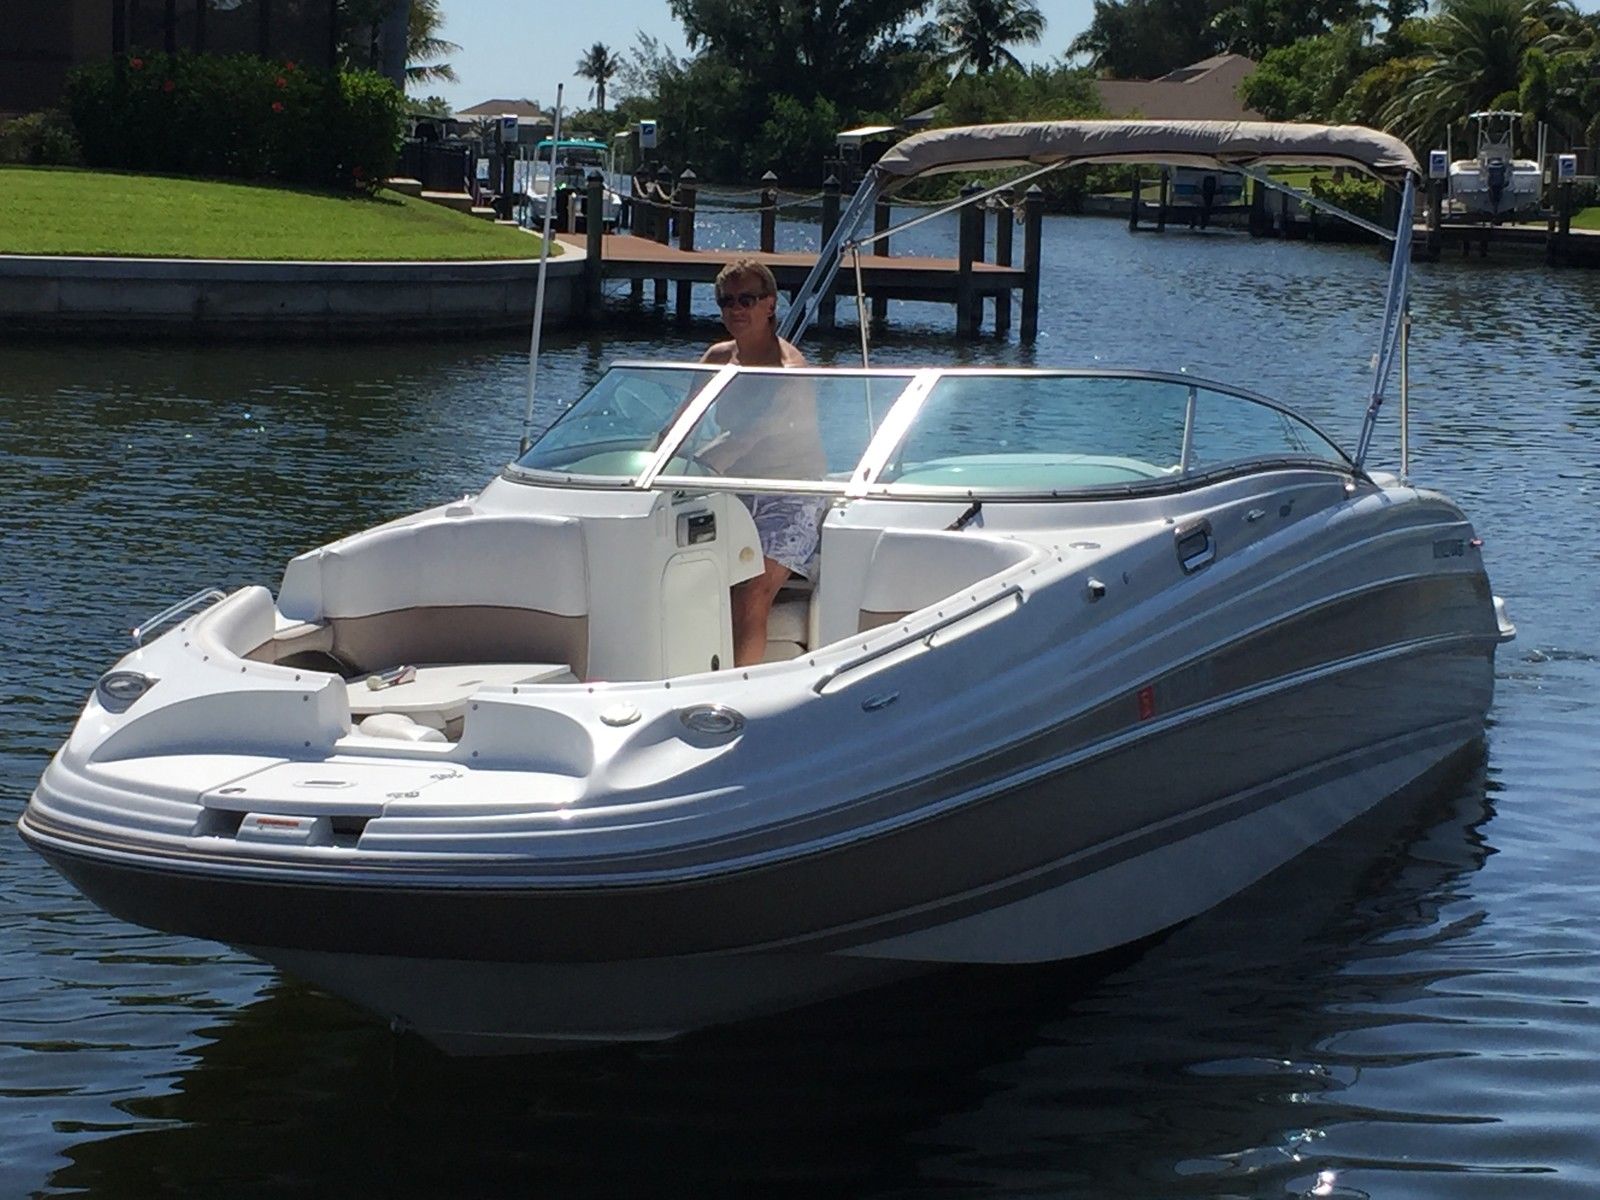 Four Winns Deck Boat Bow Rider 2005 for sale for $10,000 